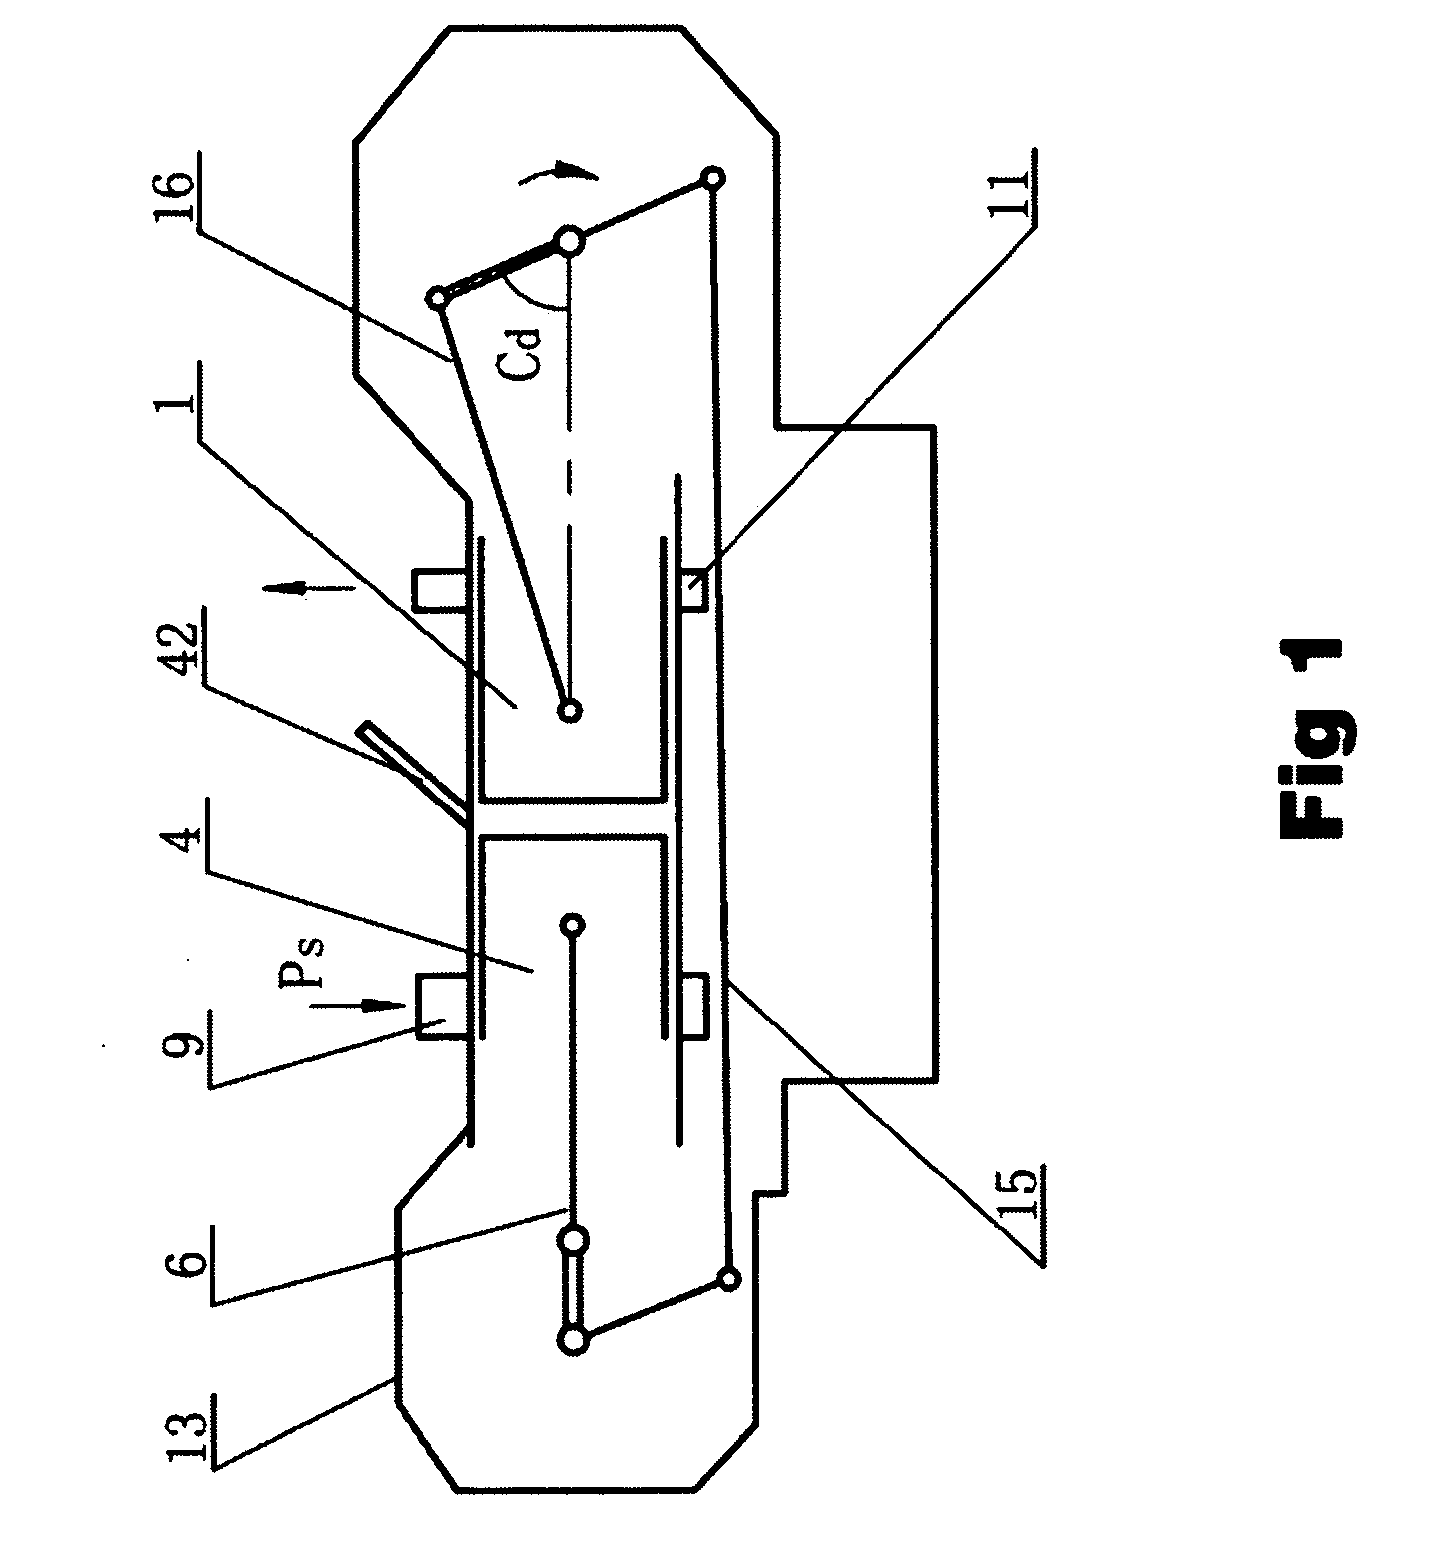 Differential Speed Reciprocating Piston Internal Combustion Engine